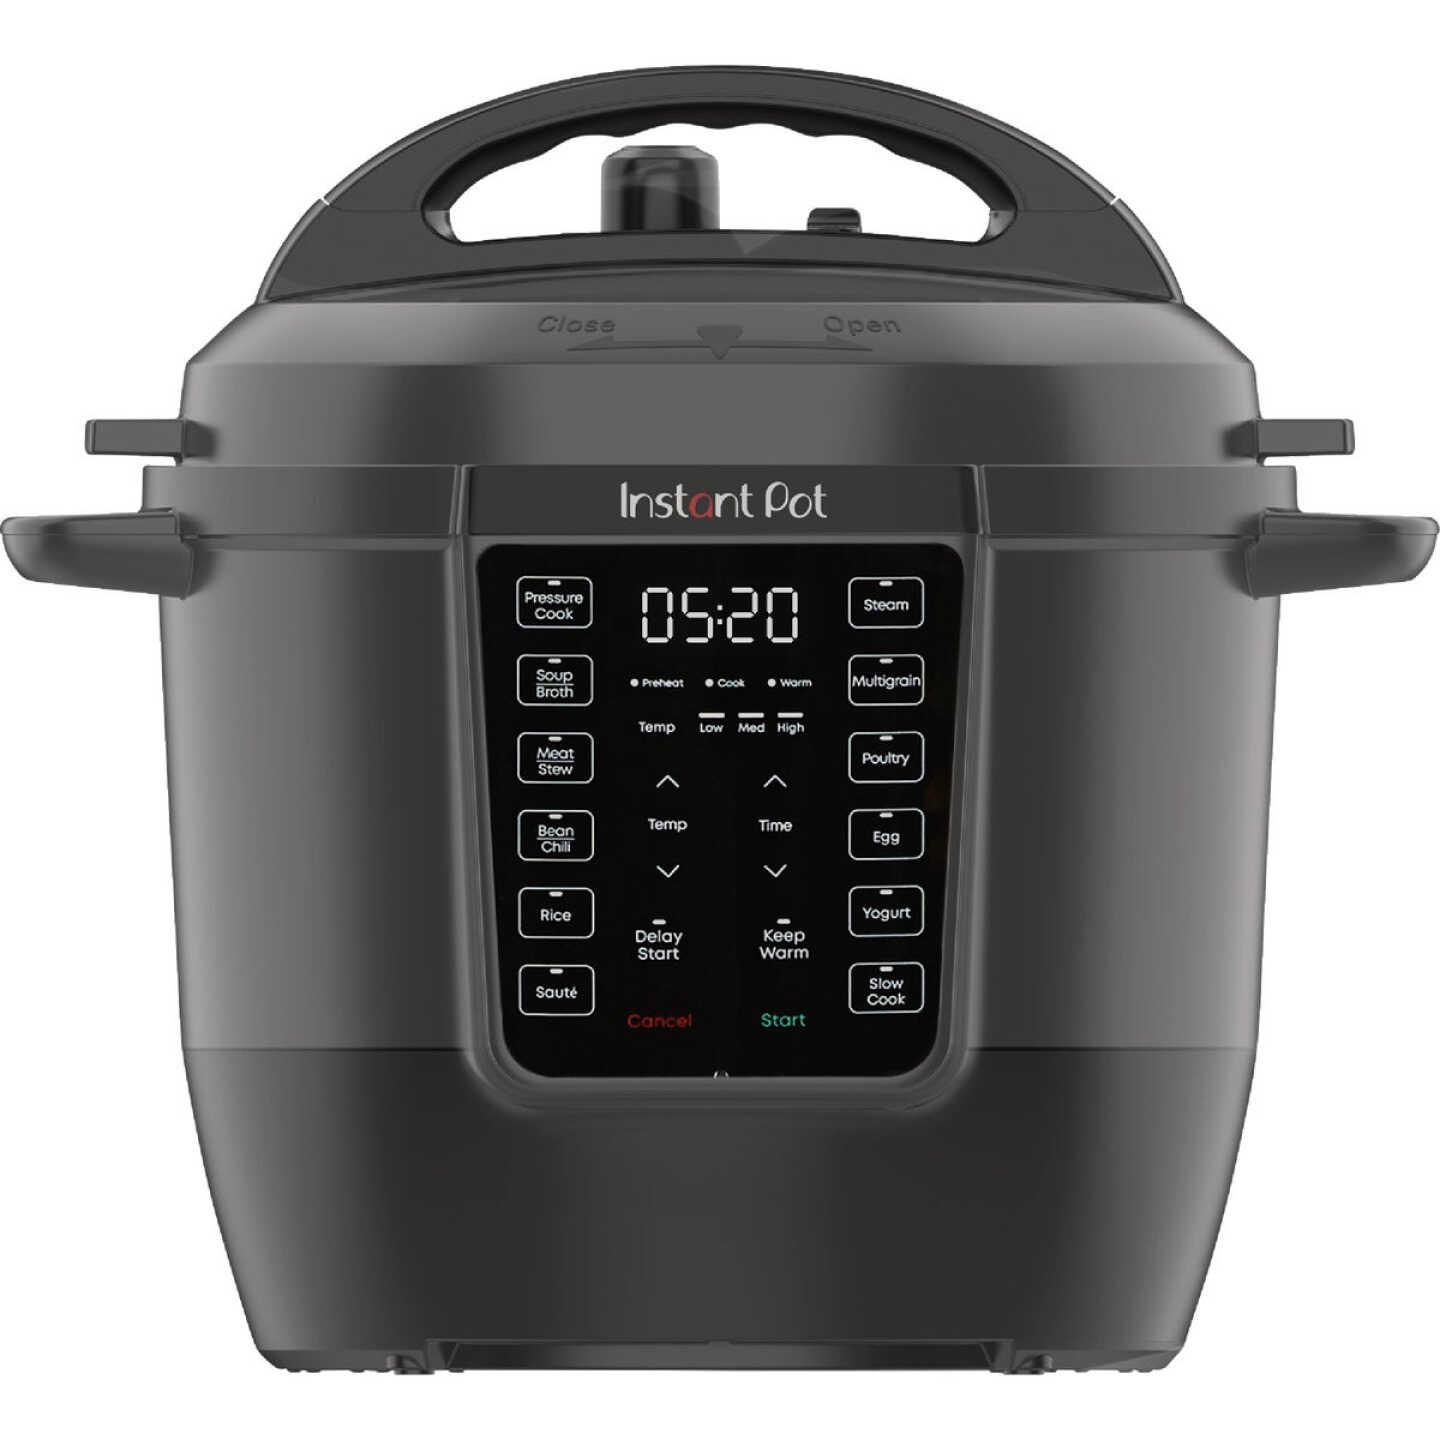 Does Instant Pot Duo 7-in-1 Electric Pressure Cooker have a delay start  function?